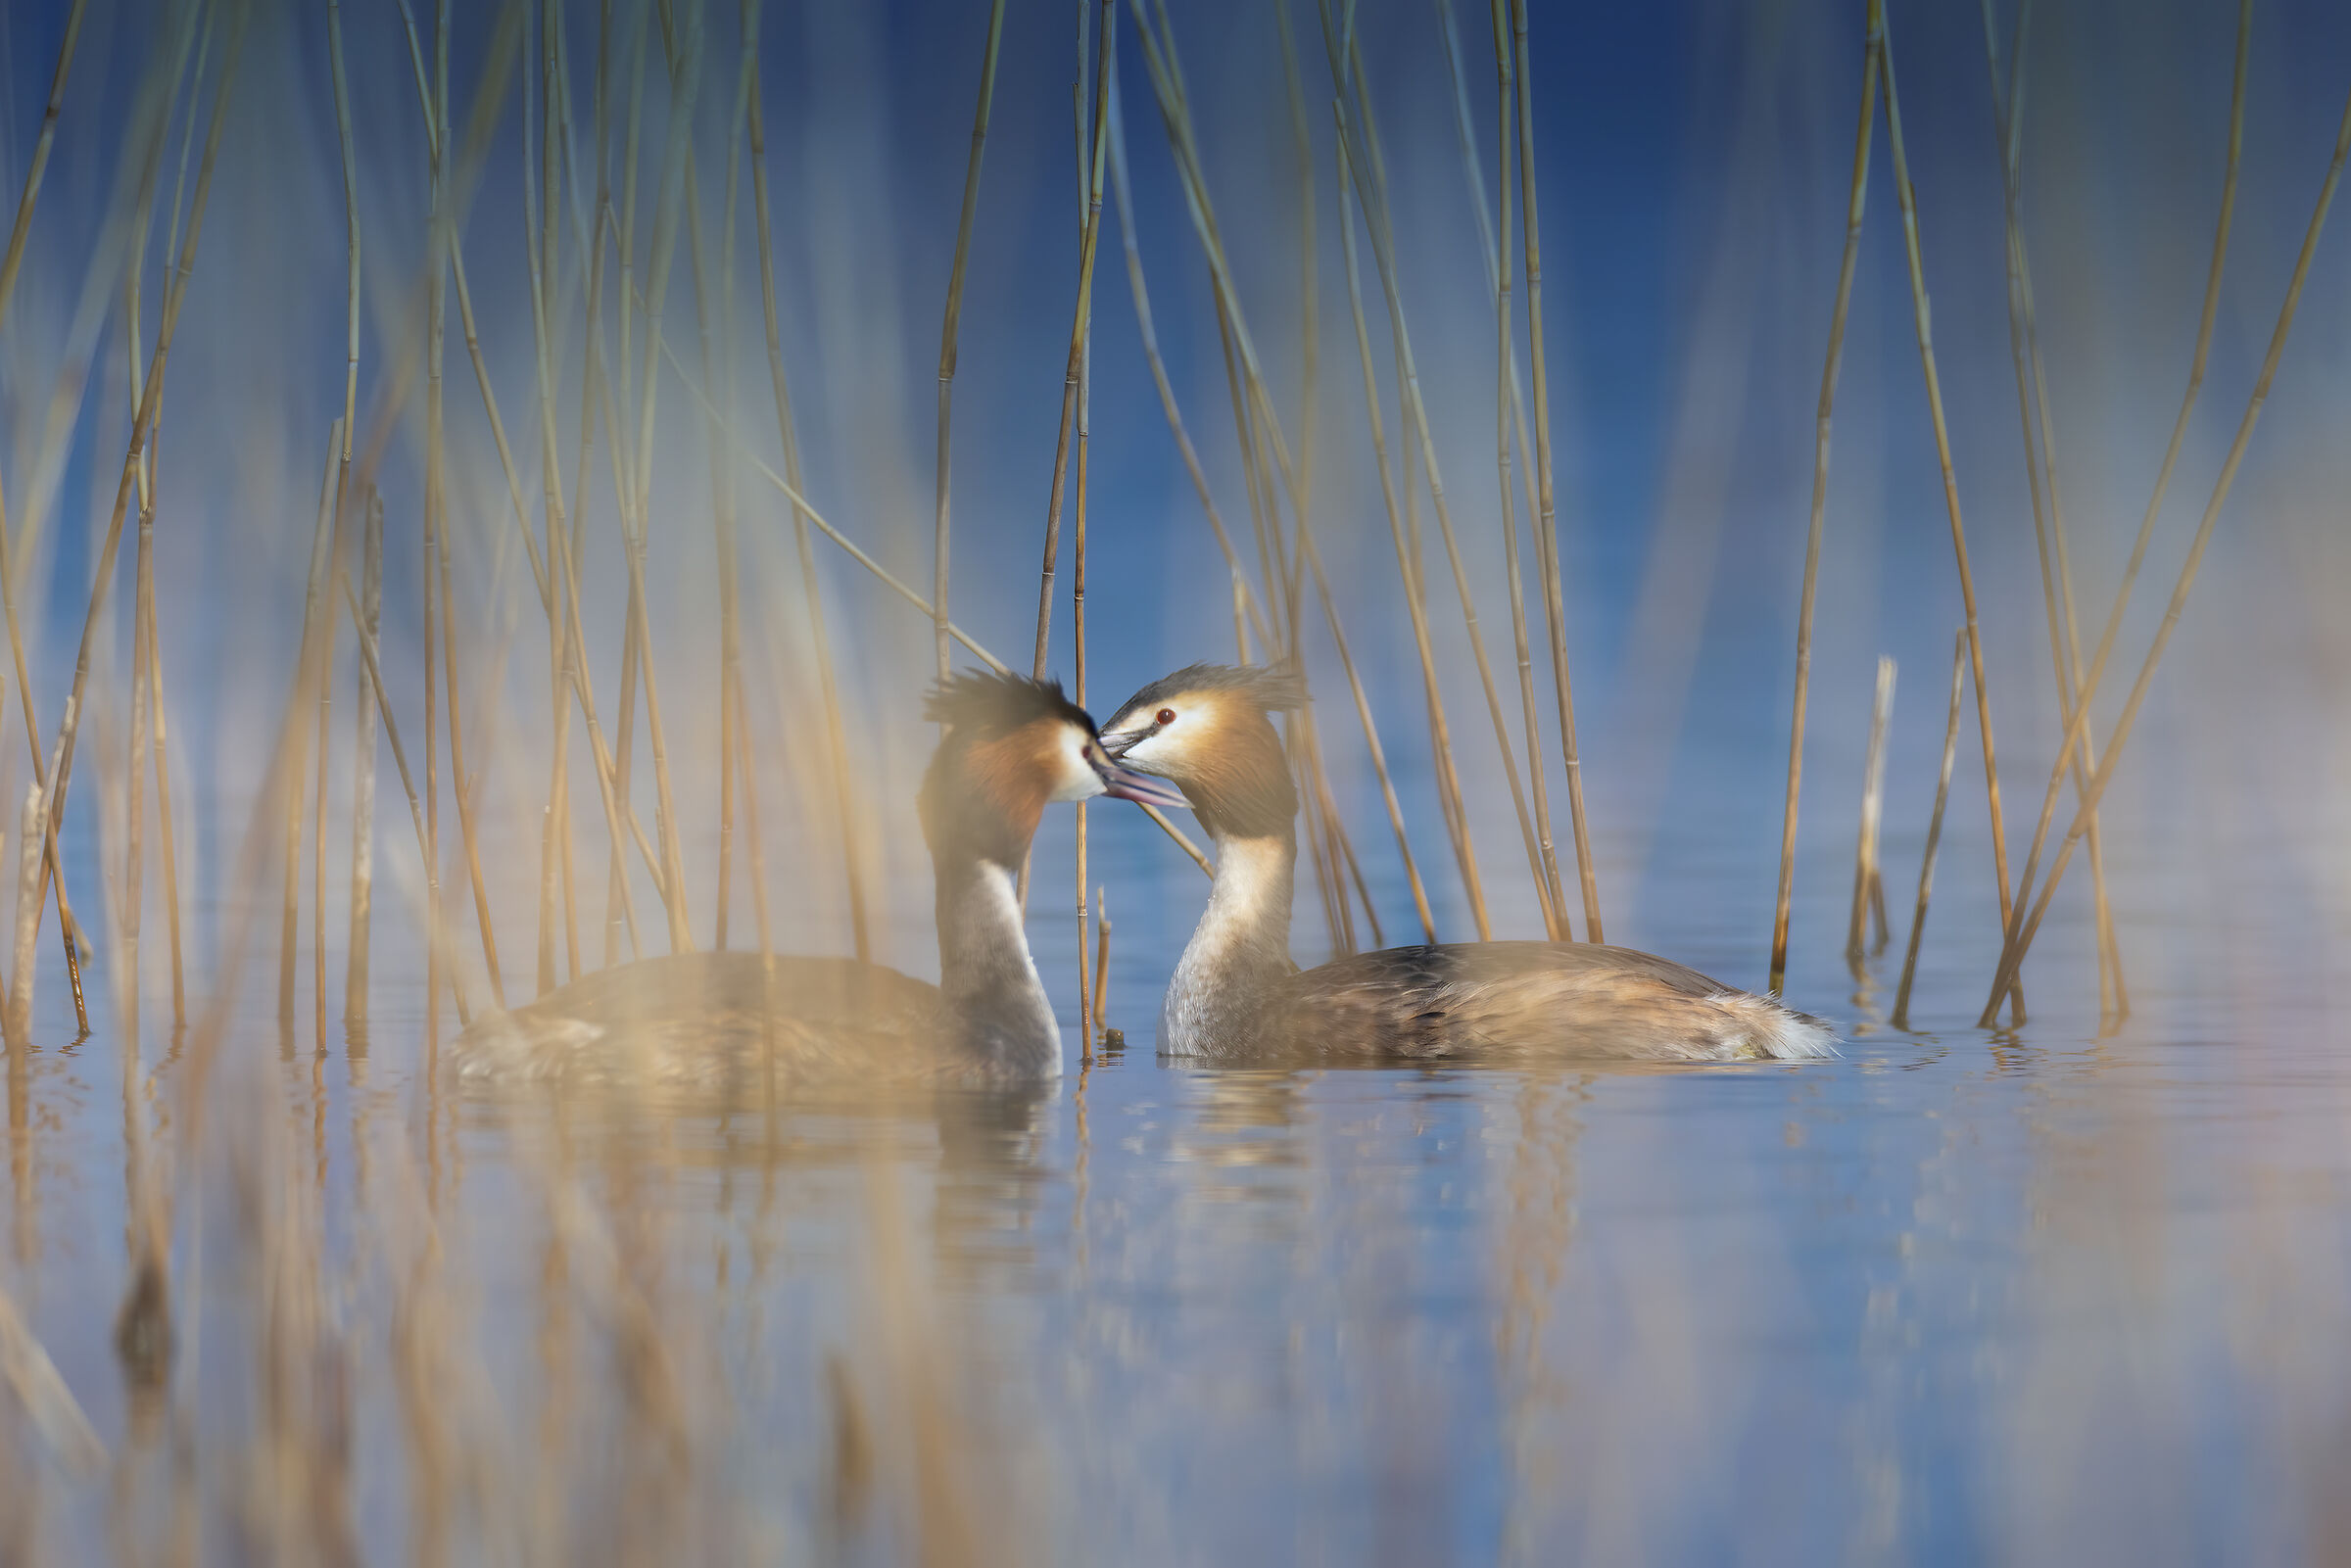 Stolen image, intimacy among the reeds ;-)...